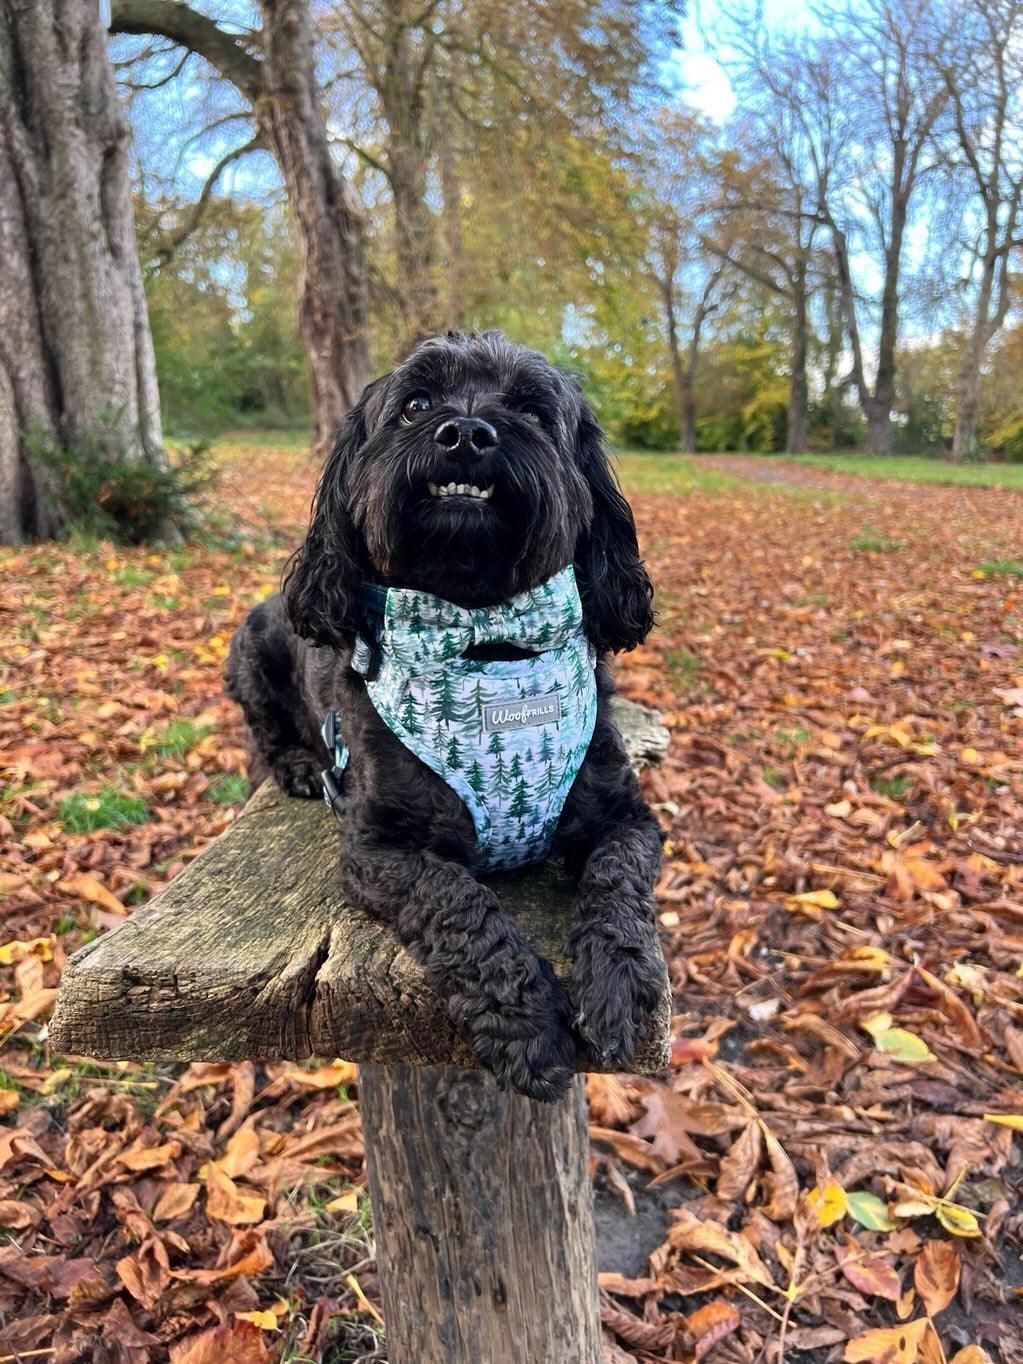 Cute black dog wearing a adventure harness with matching bow tie